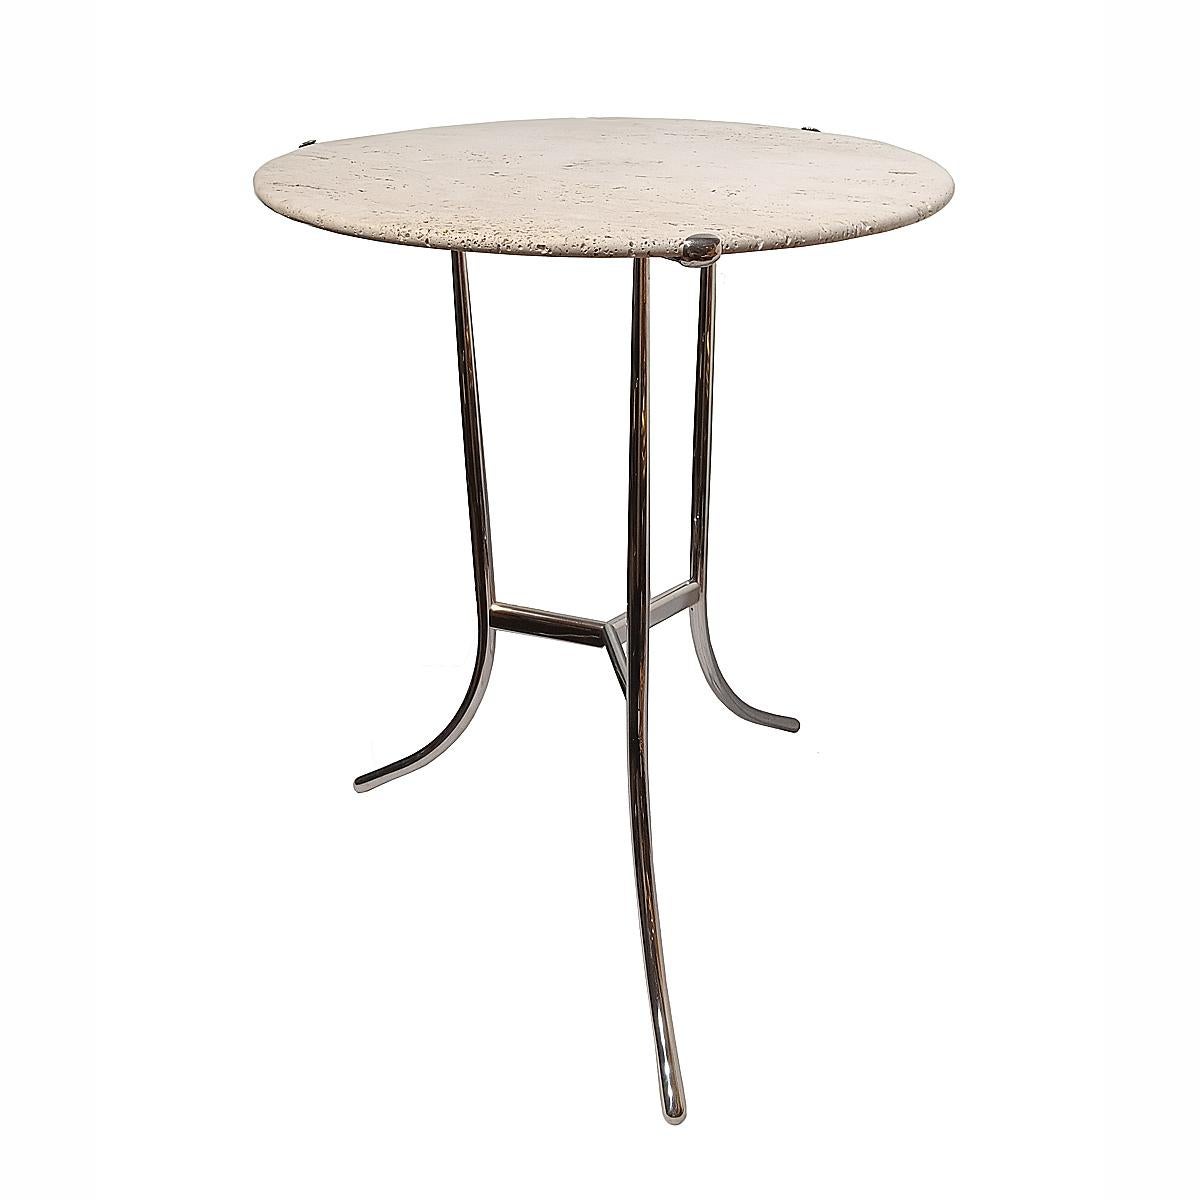 Late 20th Century Side Table by Cedric Hartman, in Travertine Marble and Nickel-Plated Brass